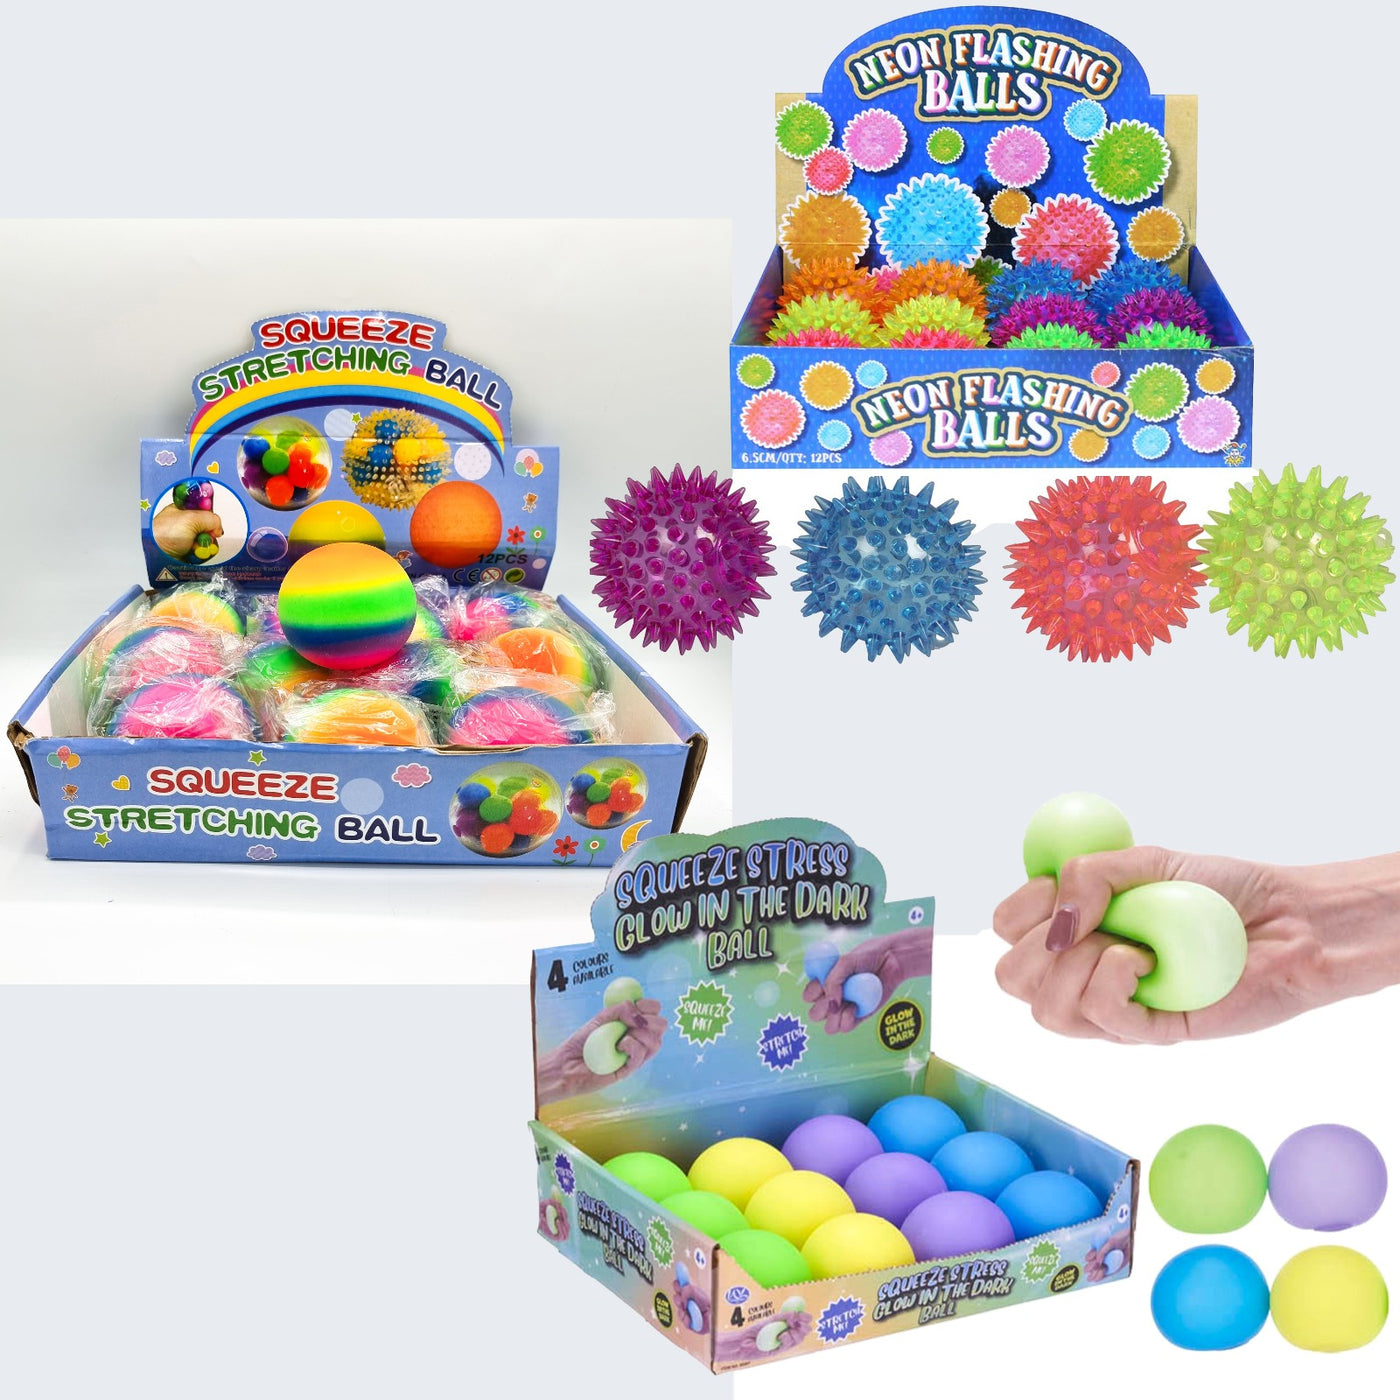 Children Pre Filled Neon Glow Birthday Party Goody Bags With Toys And Sweets, Party Favours.